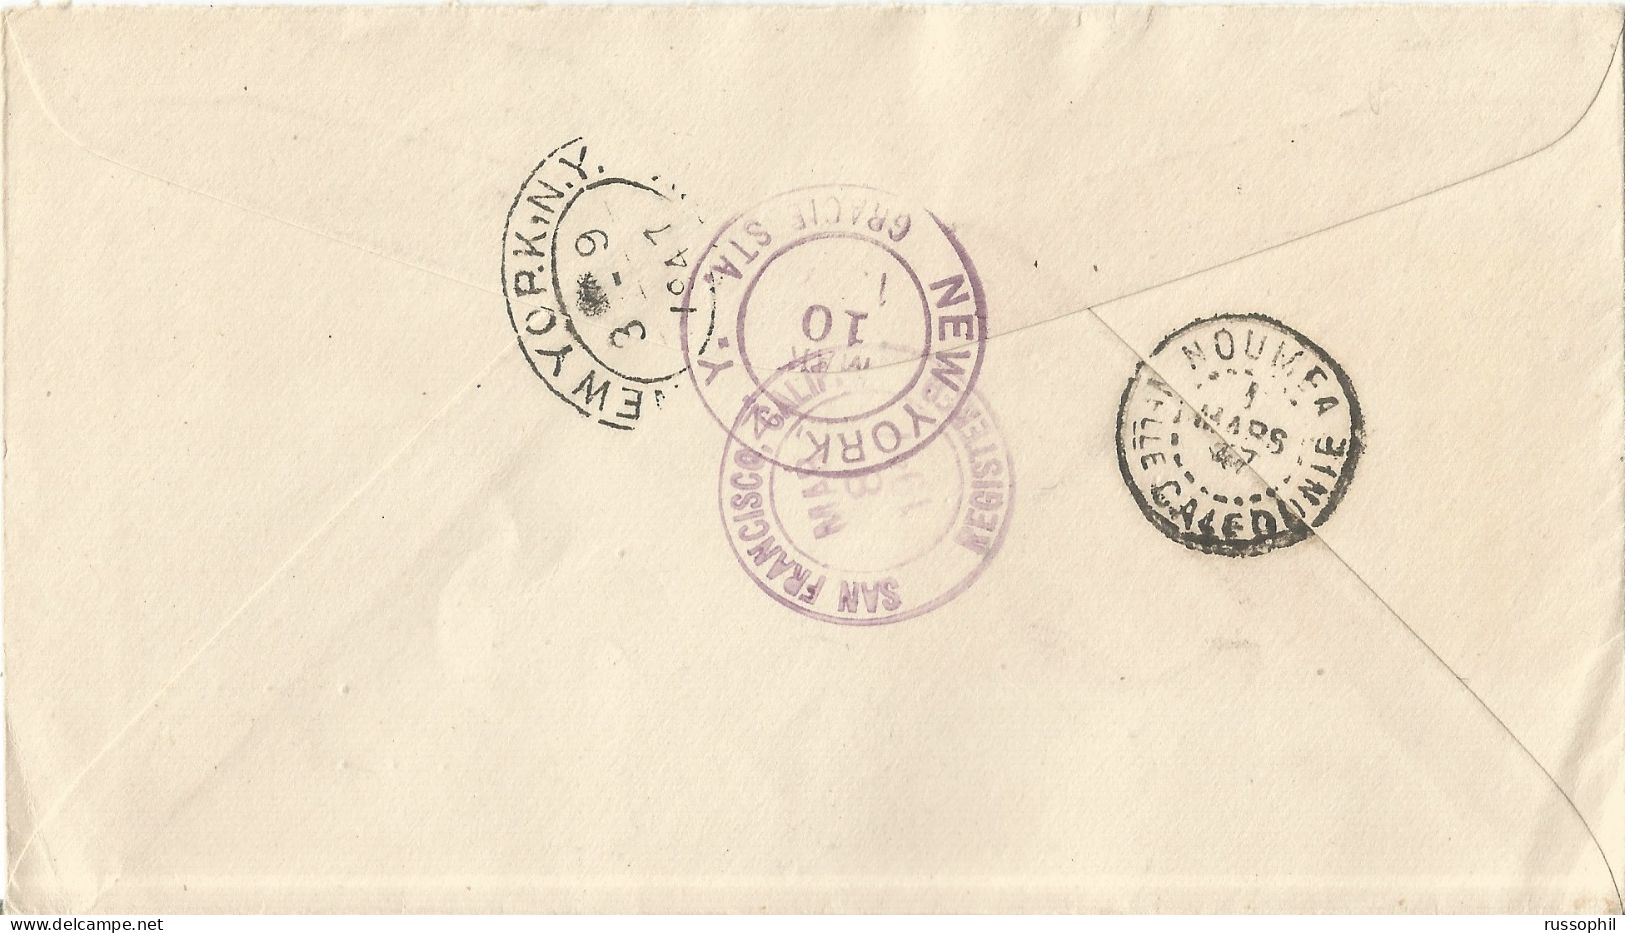 WALLIS AND FUTUNA - 60 FR FRANKING "FROM CHAD TO THE RHINE RIVER" ISSUE ON REGISTERED COVER TO THE USA - 1946 - Covers & Documents